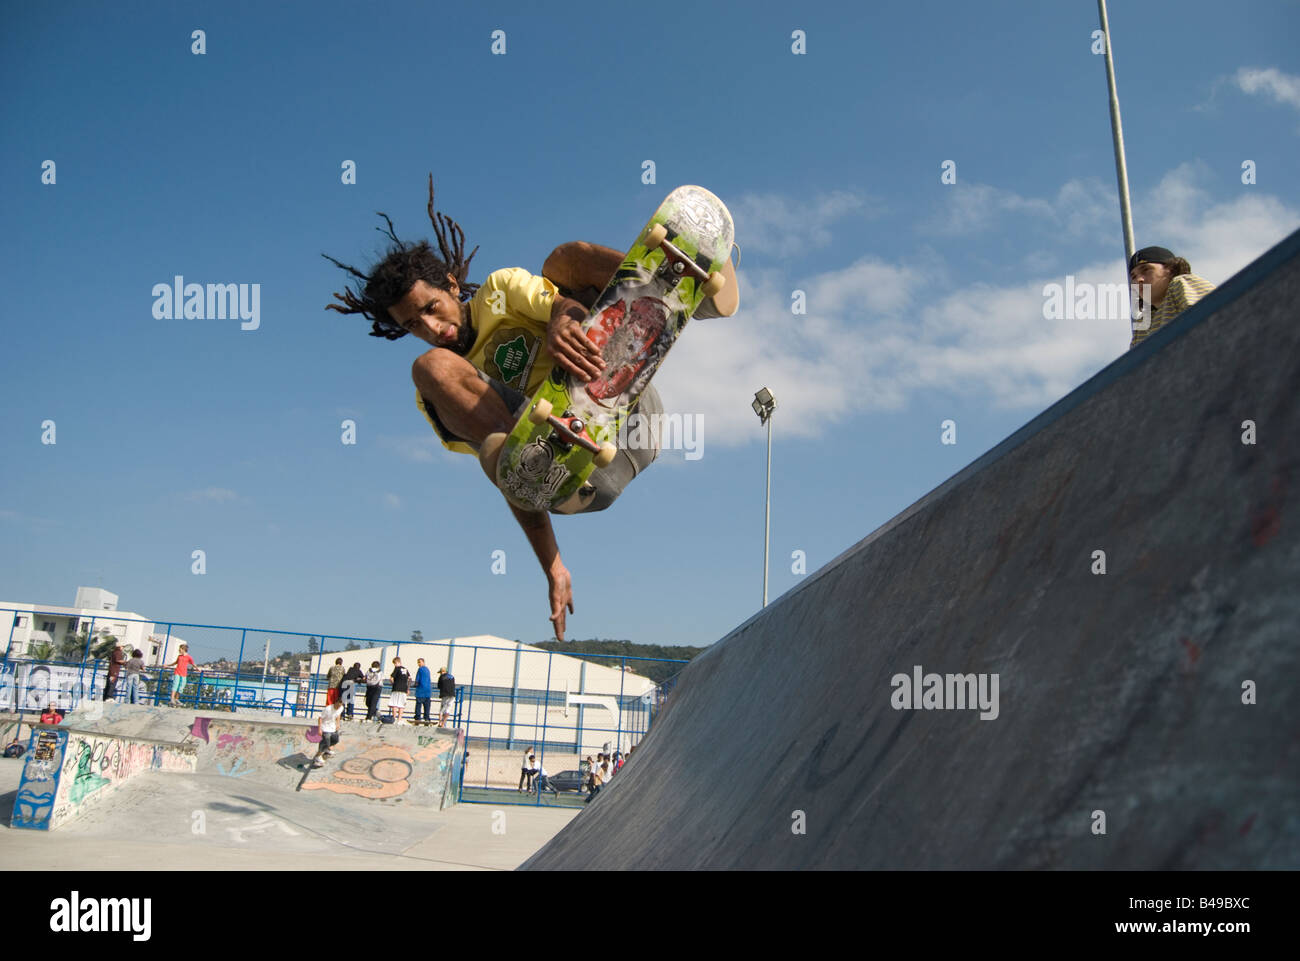 A young man practice skate boarding in a public park Florianopolis Brazil Stock Photo